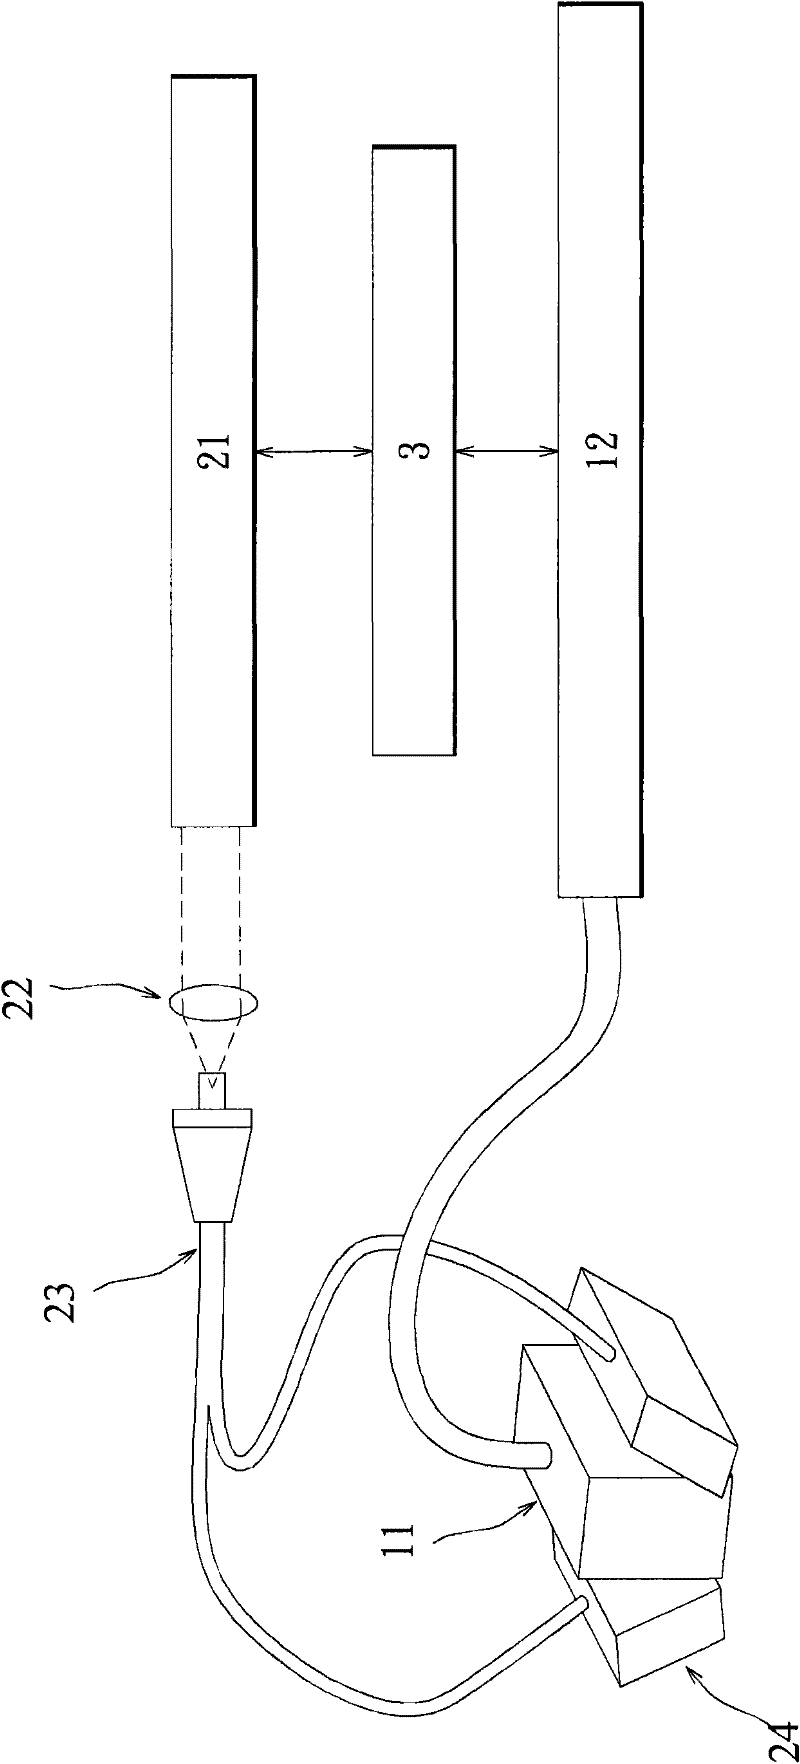 Calcification imaging method and system